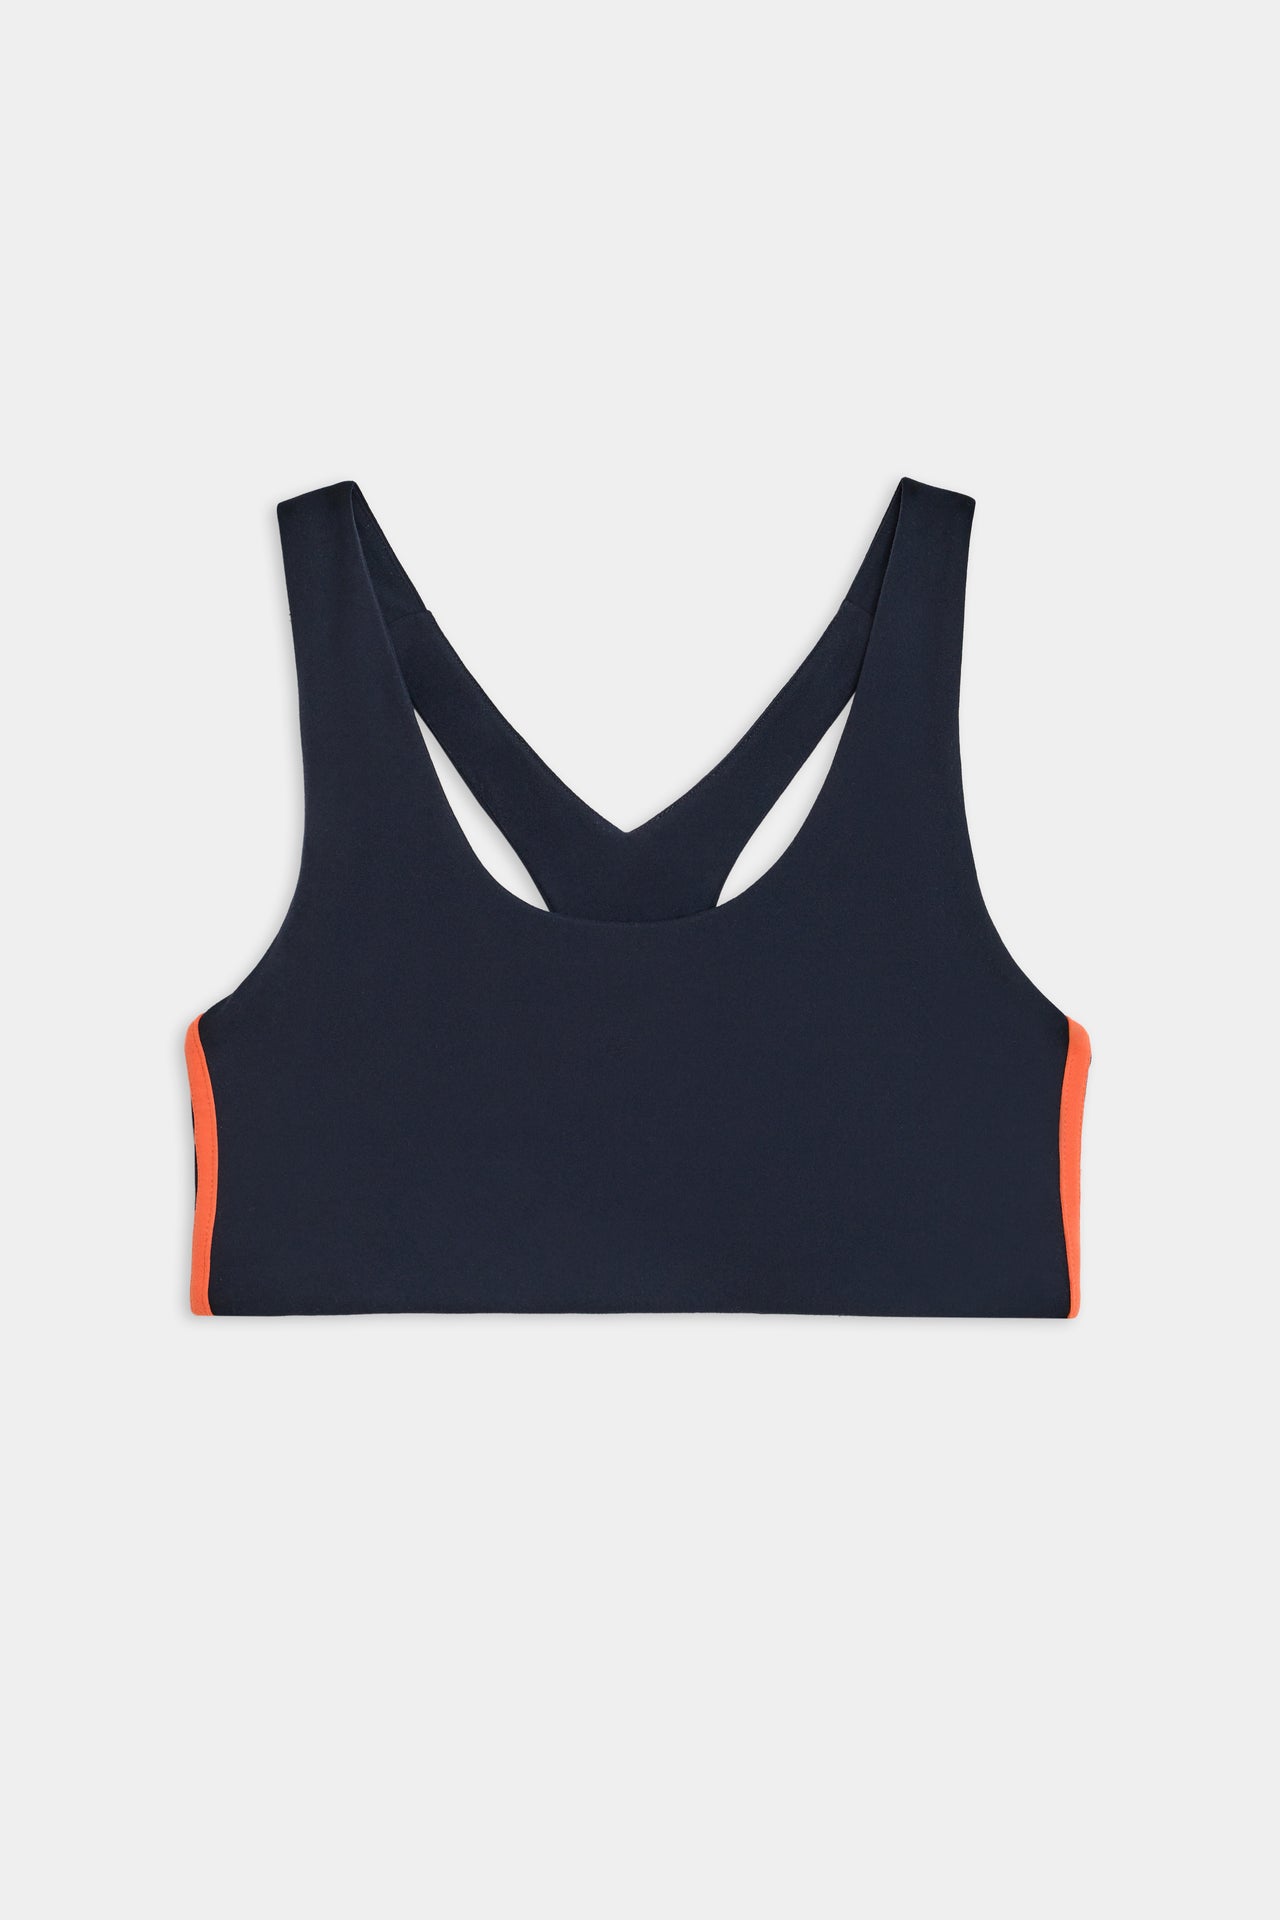 Flat view of dark blue sports bra with two red stripes down the side